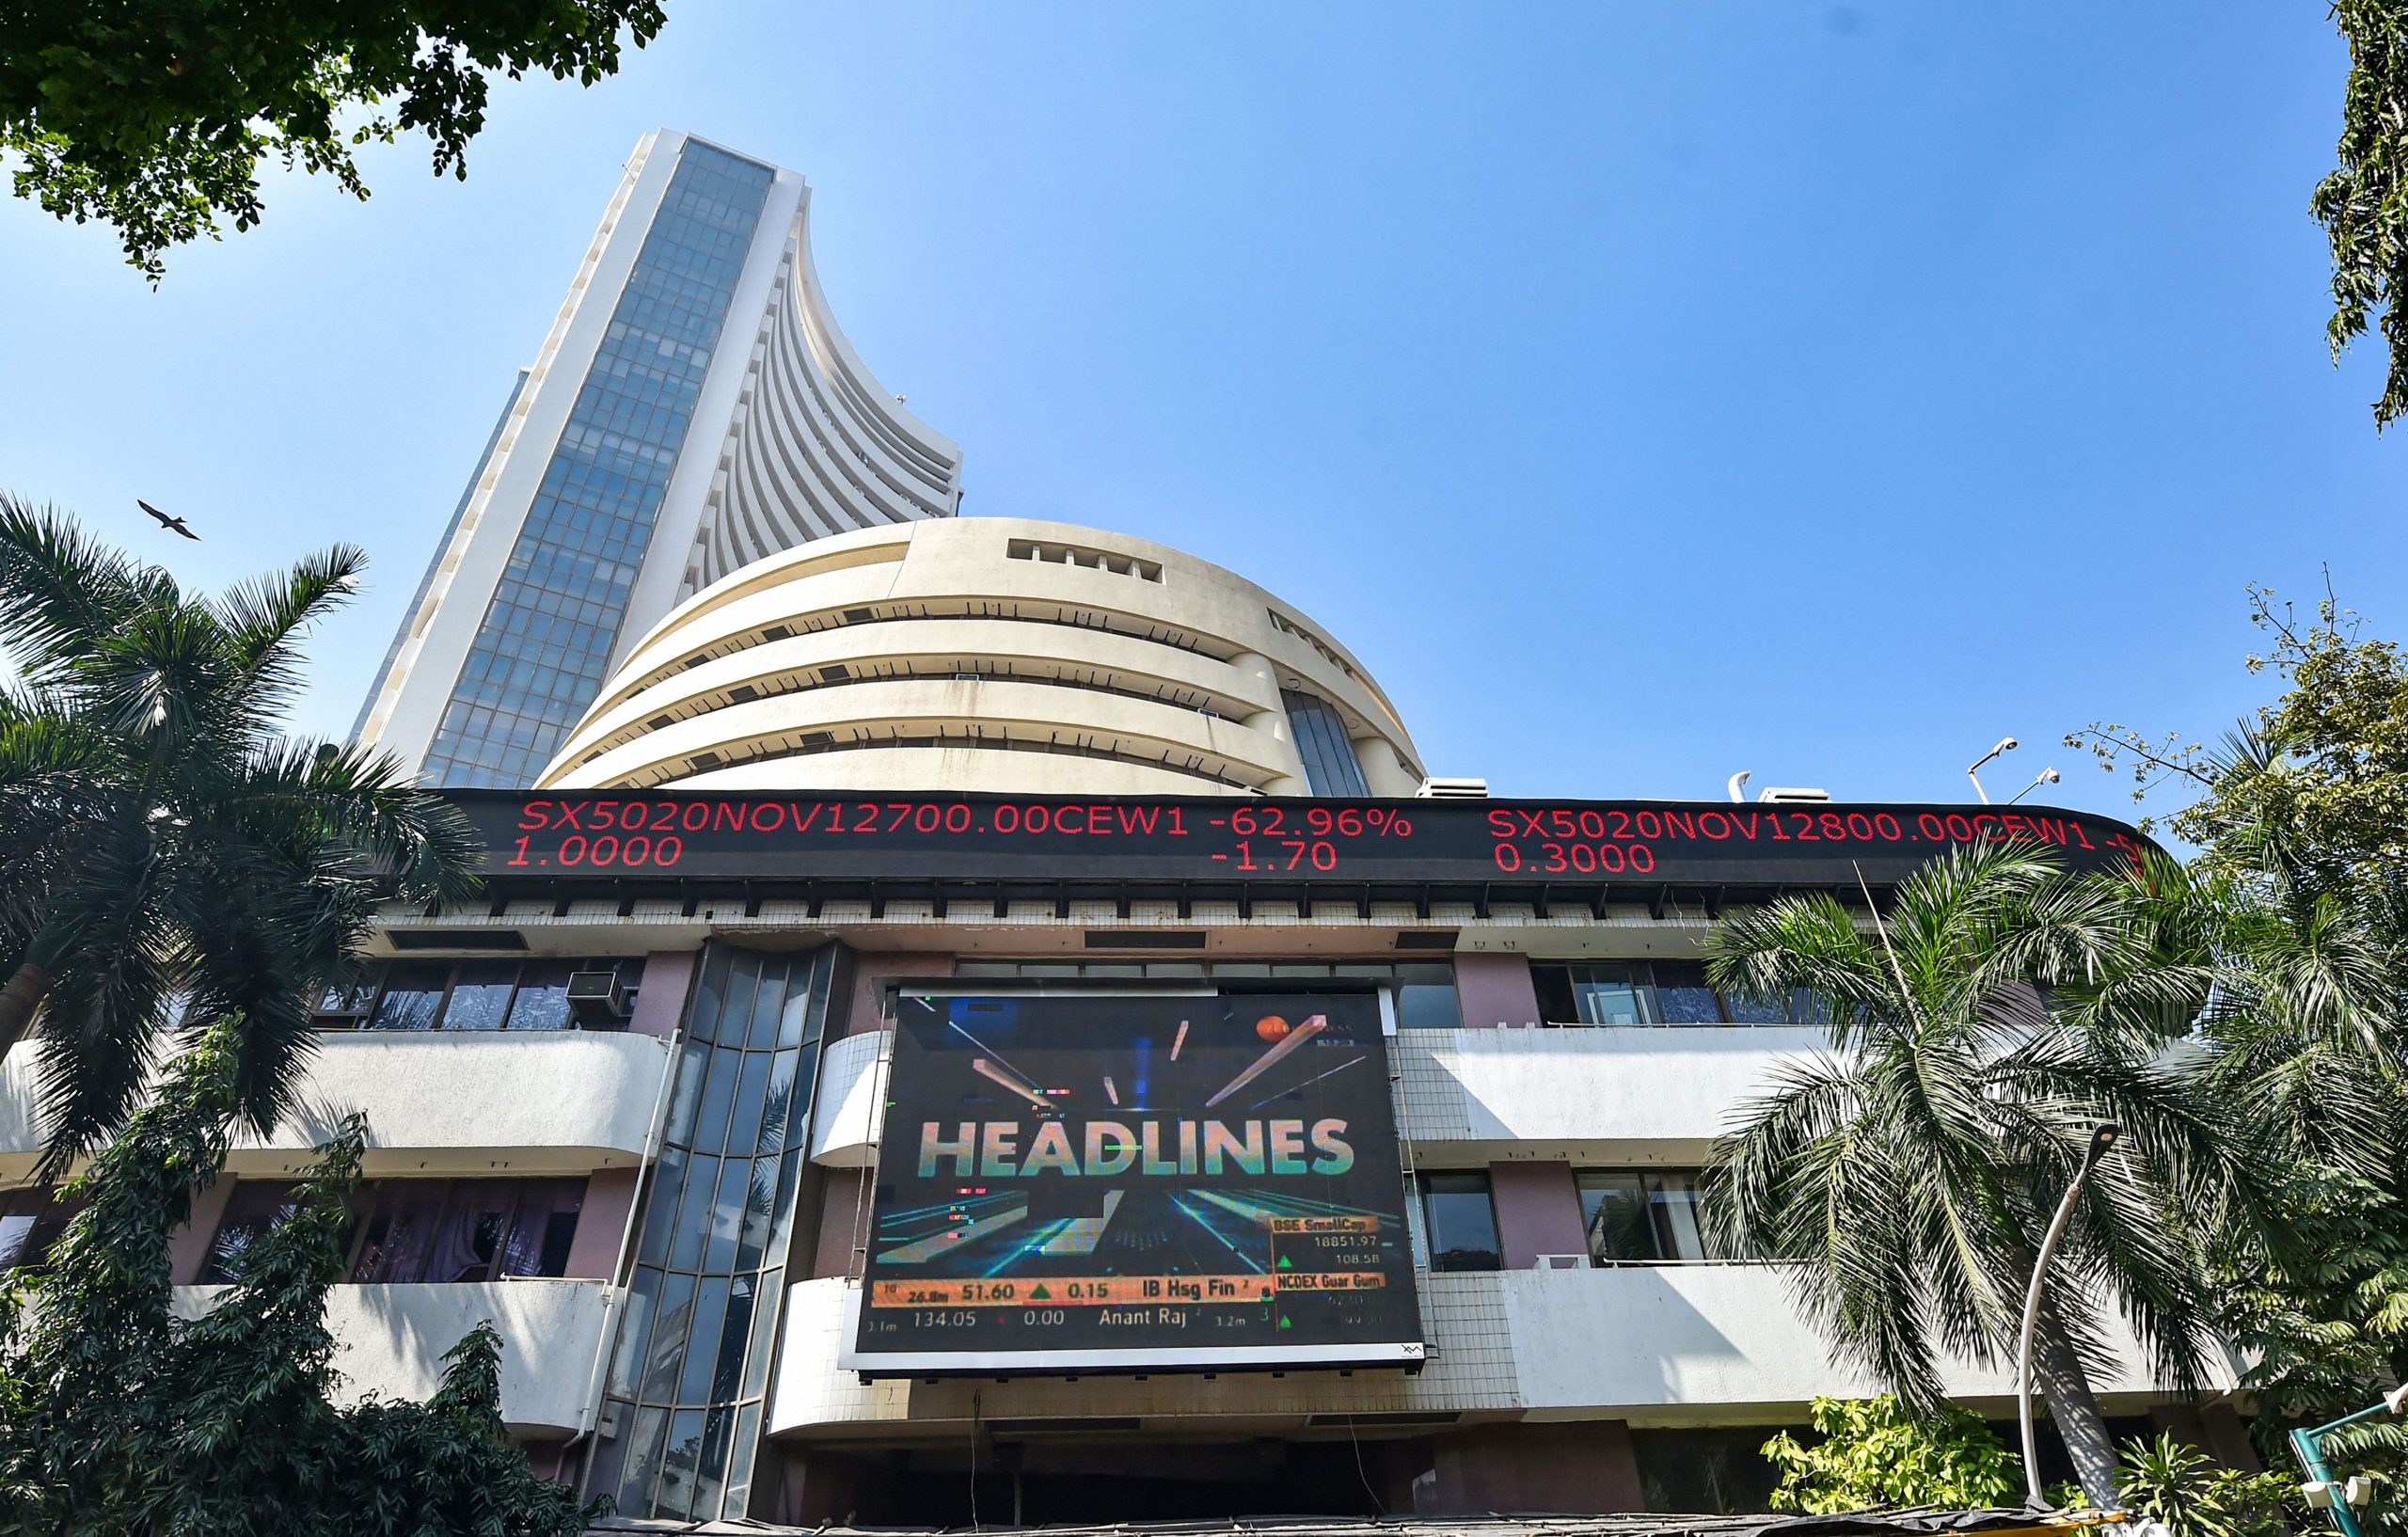 Why did Sensex fall by 1,708 points today?